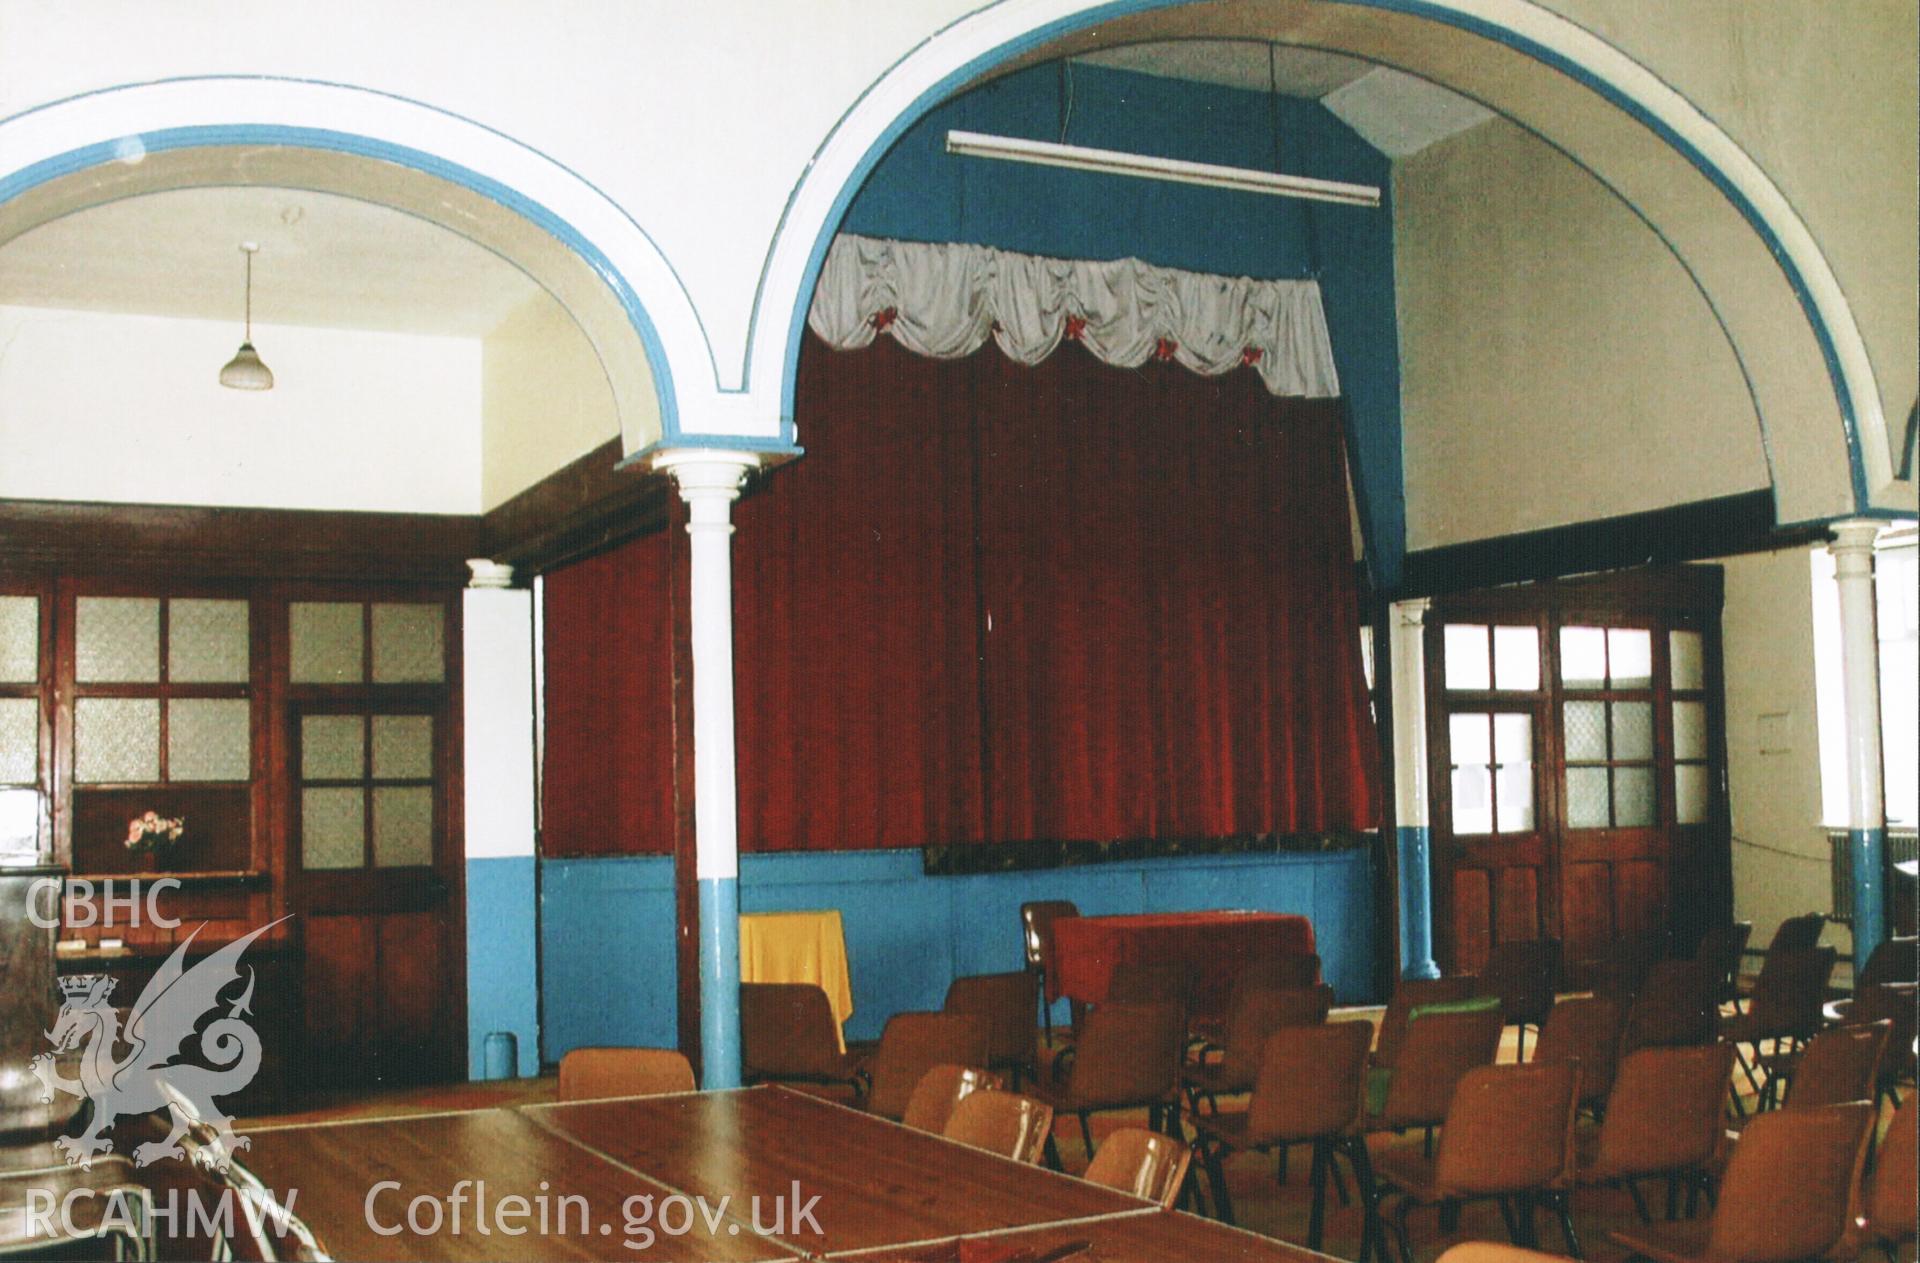 Colour photograph of the vestry and stage at Bethania chapel, Maesteg. Donated to the RCAHMW by Cyril Philips as part of the Digital Dissent Project.